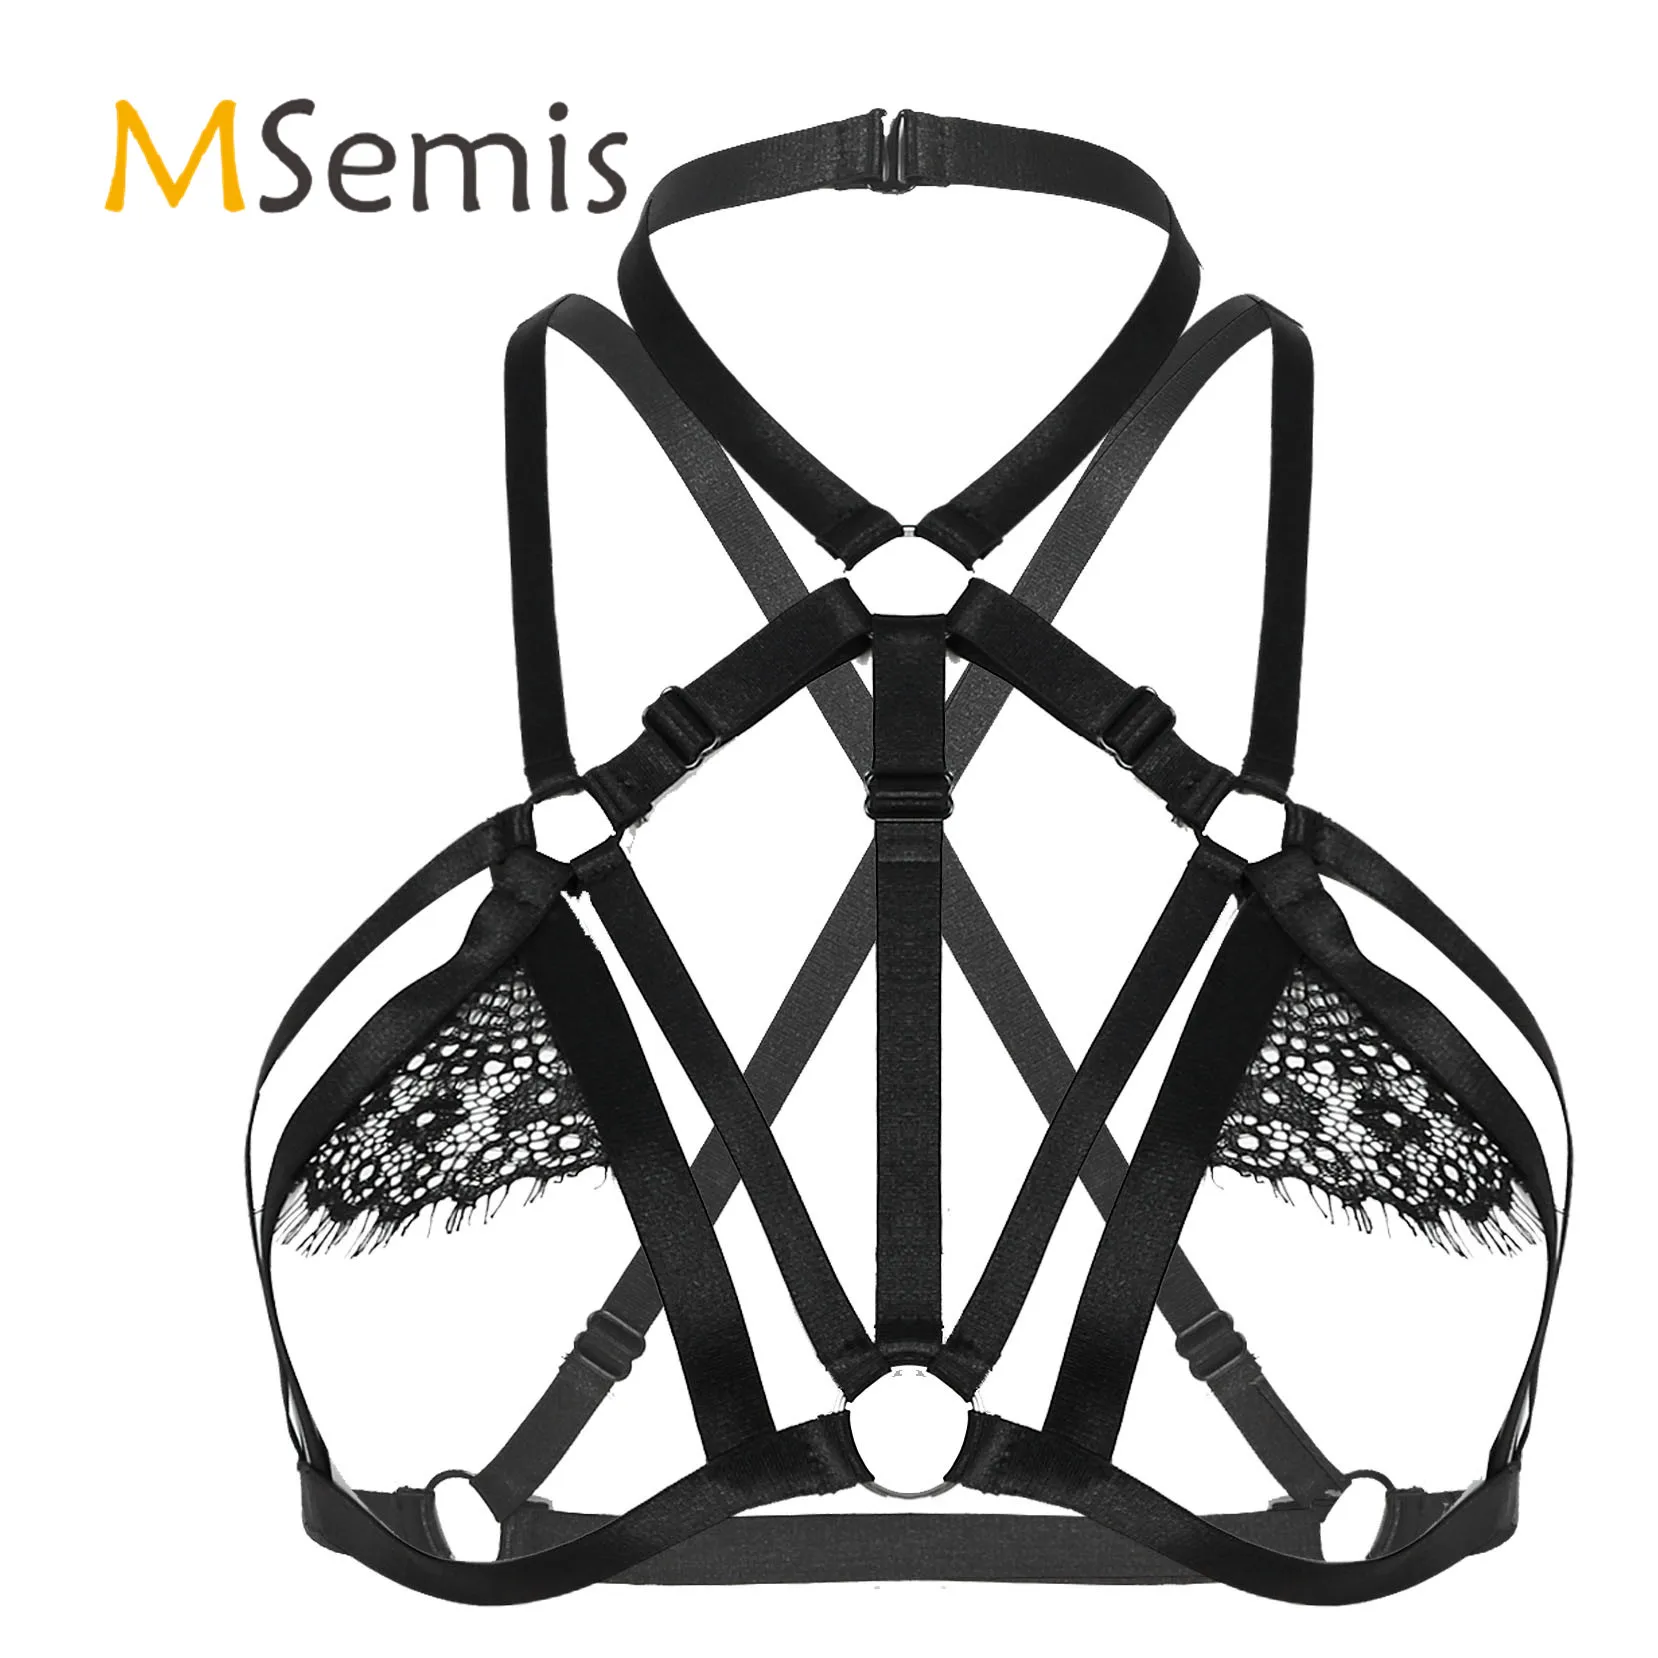 

Womens Lingerie Hot Hollow Out Strappy Bra Tops Lingerie Underwear O Ring Lace Trim Bralette Wireless Unlined Erotic Brassiere